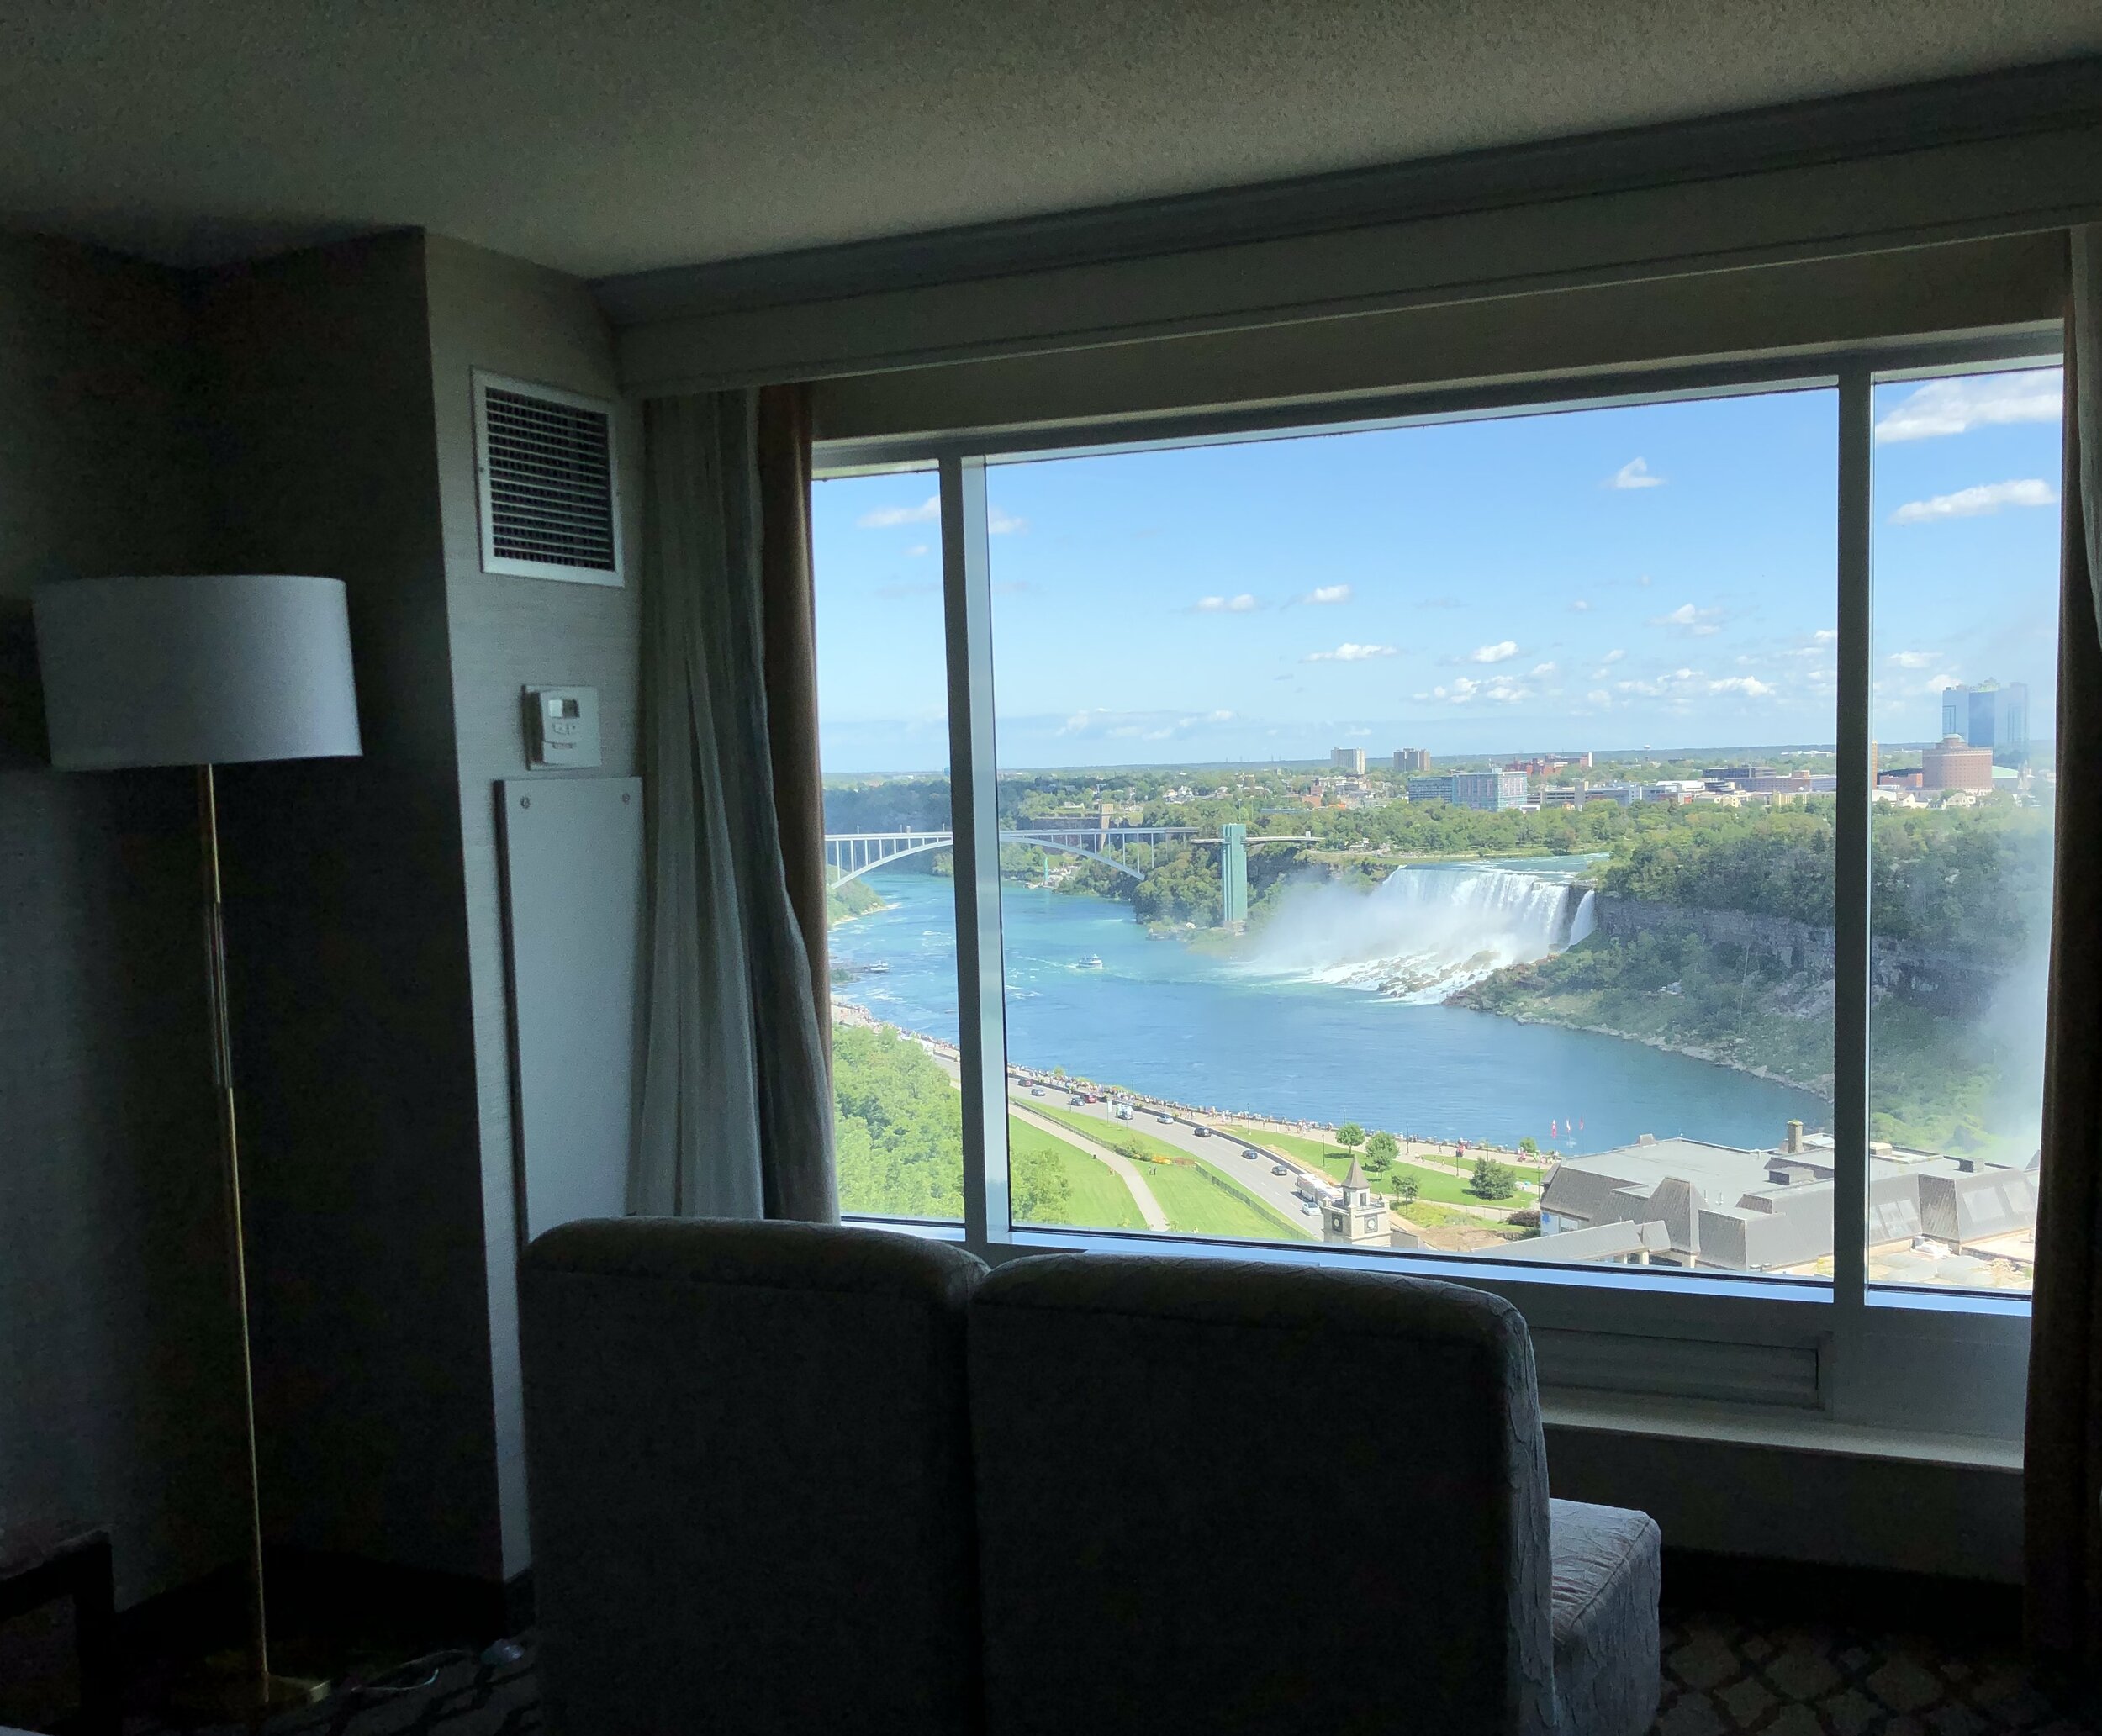 We got to the Fallsview Marriott early &amp; our room was ready!  We knew the view would be there when we returned.  Off we went to Niagara-On-The Lake, Ontario. It was a beautiful short drive away.